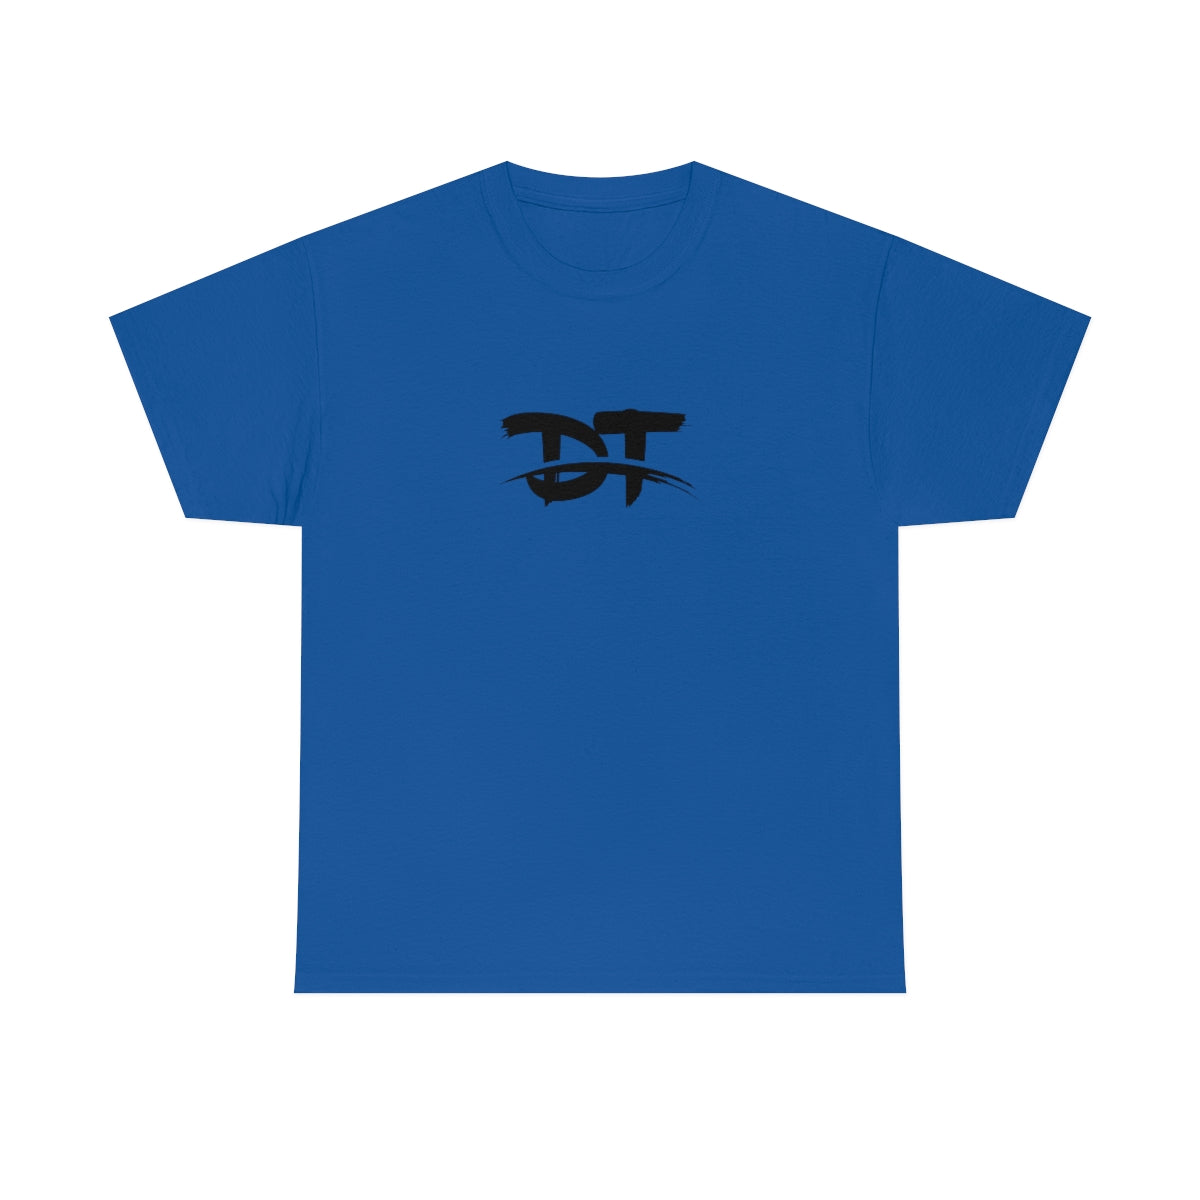 Dre Terry "DT" Tee